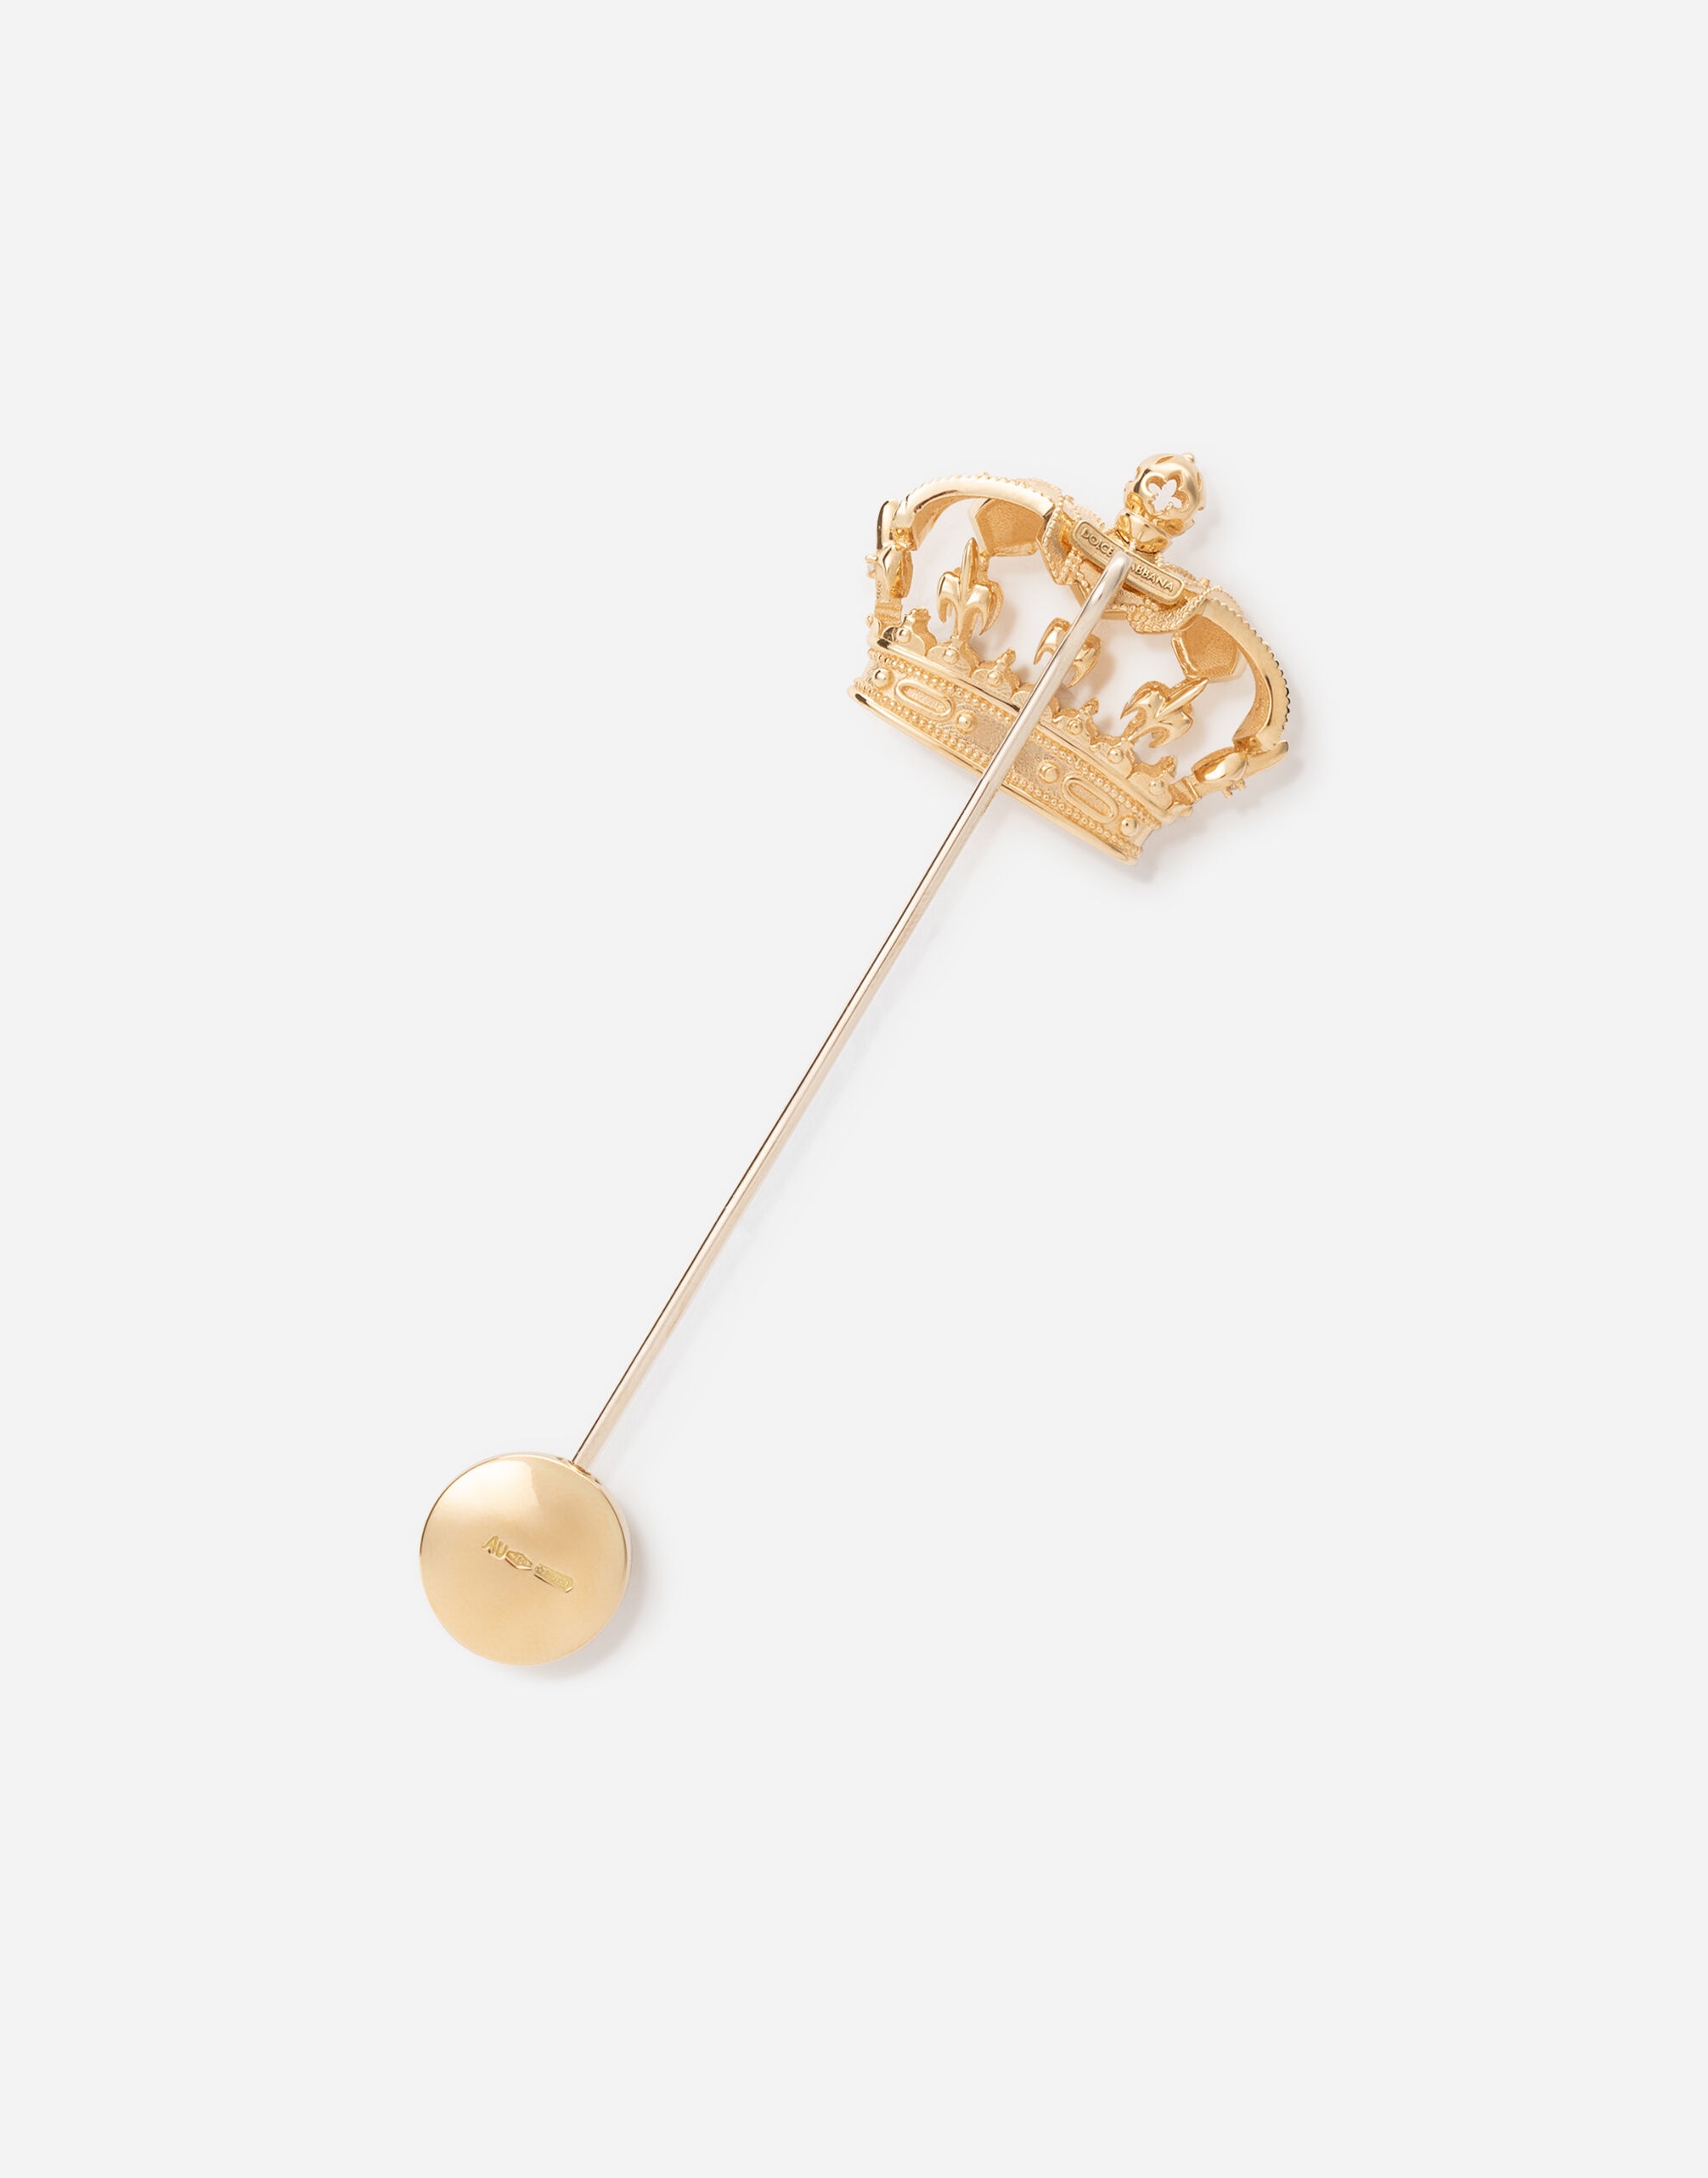 Crown yellow gold stick pin brooch - 3